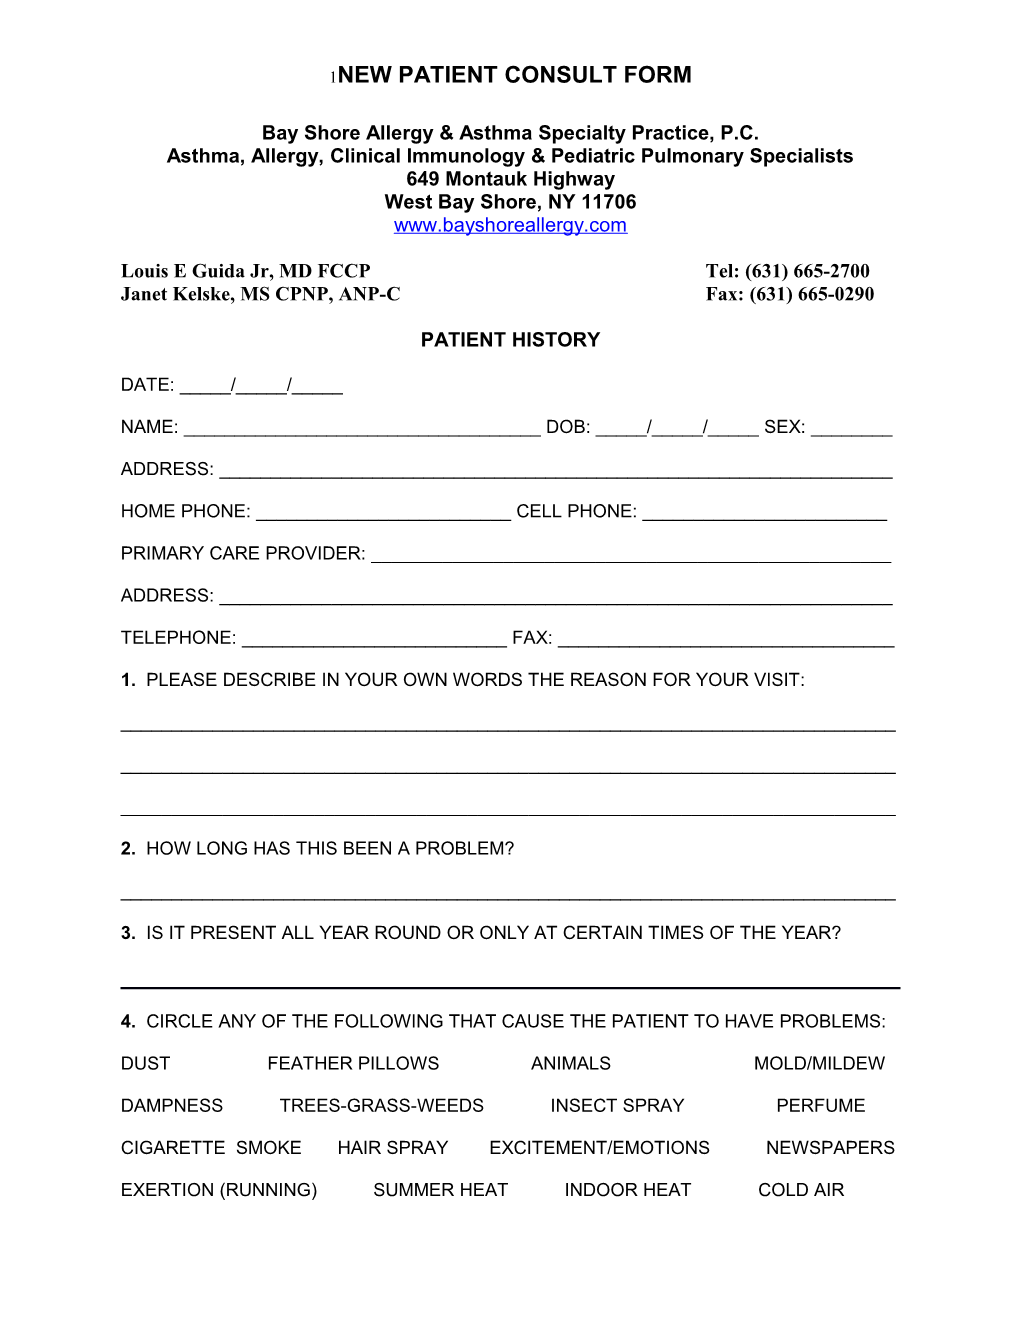 New Patient Consult Form